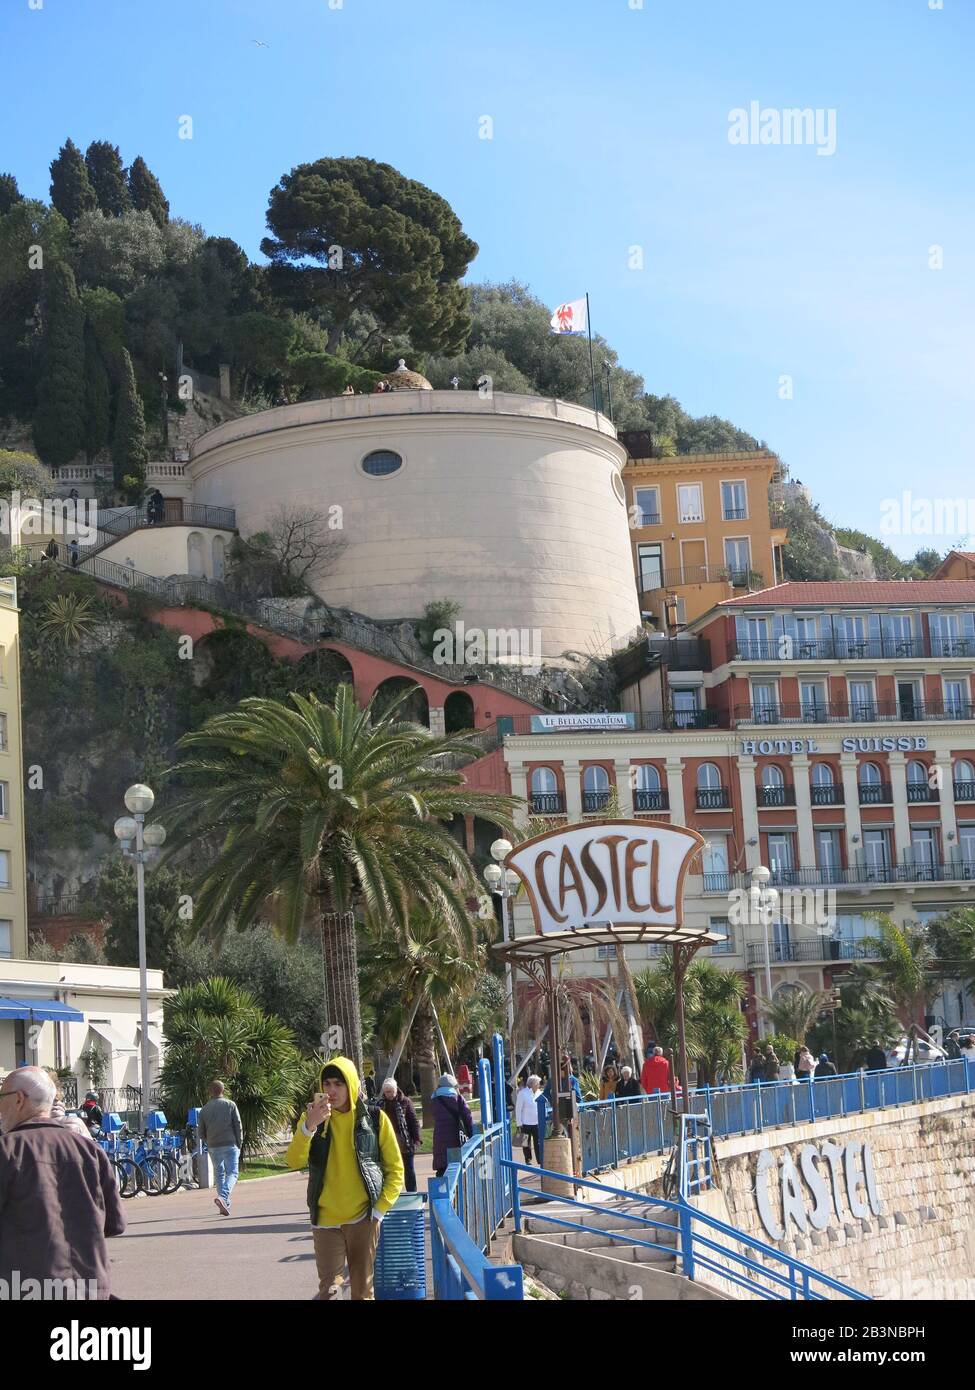 View from Castel Plage looking towards the Bellanda round tower and the Parc de la Colline, Nice on the Cote d'Azur. Stock Photo